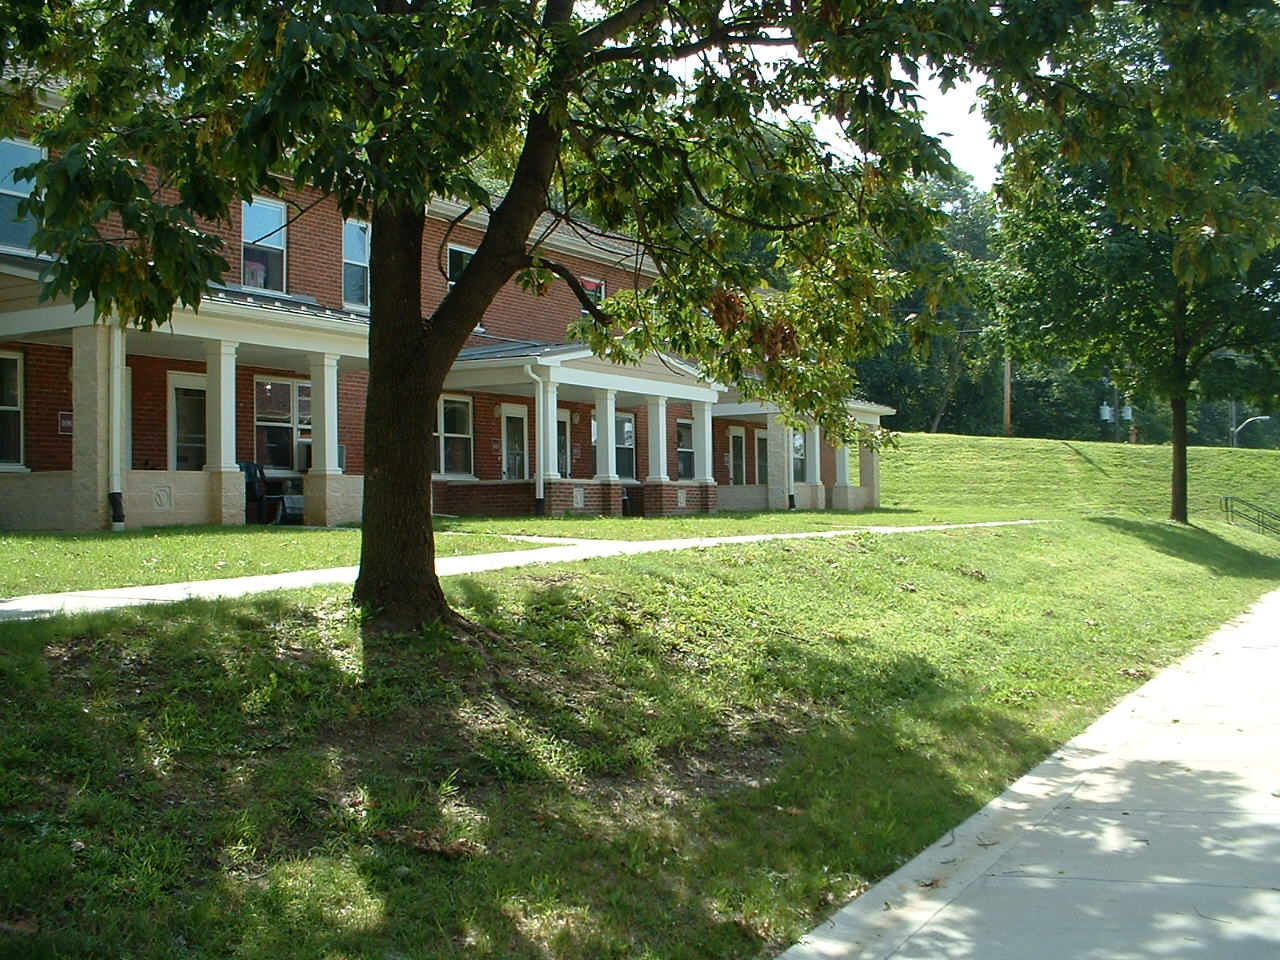 Photo of Harrisburg Housing Authority. Affordable housing located at 351 CHESTNUT Street HARRISBURG, PA 17101